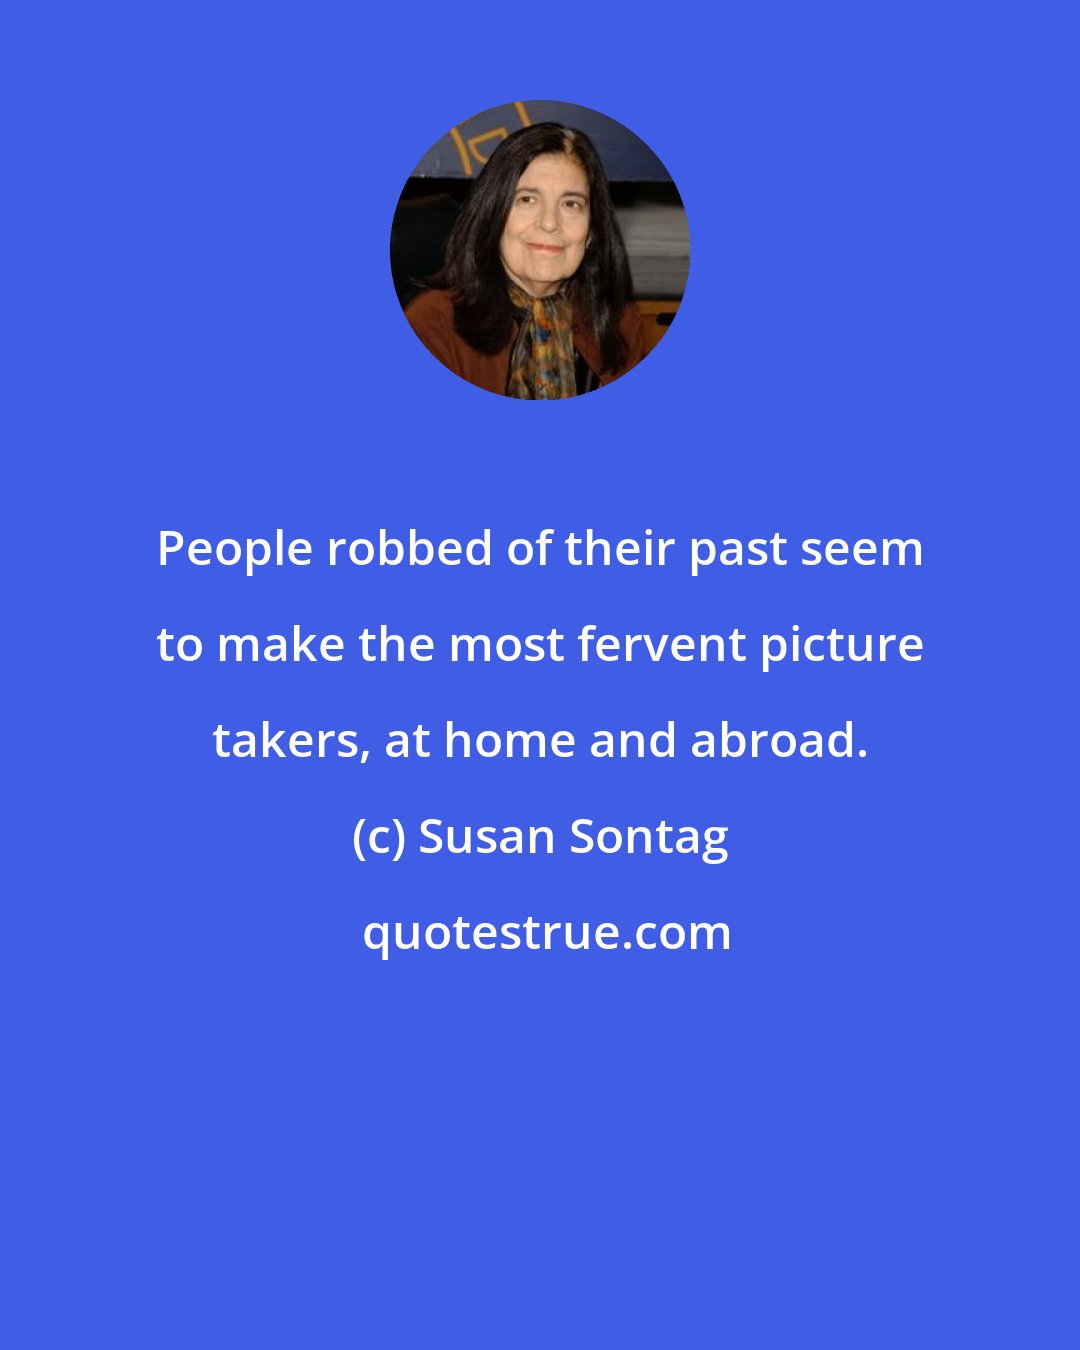 Susan Sontag: People robbed of their past seem to make the most fervent picture takers, at home and abroad.